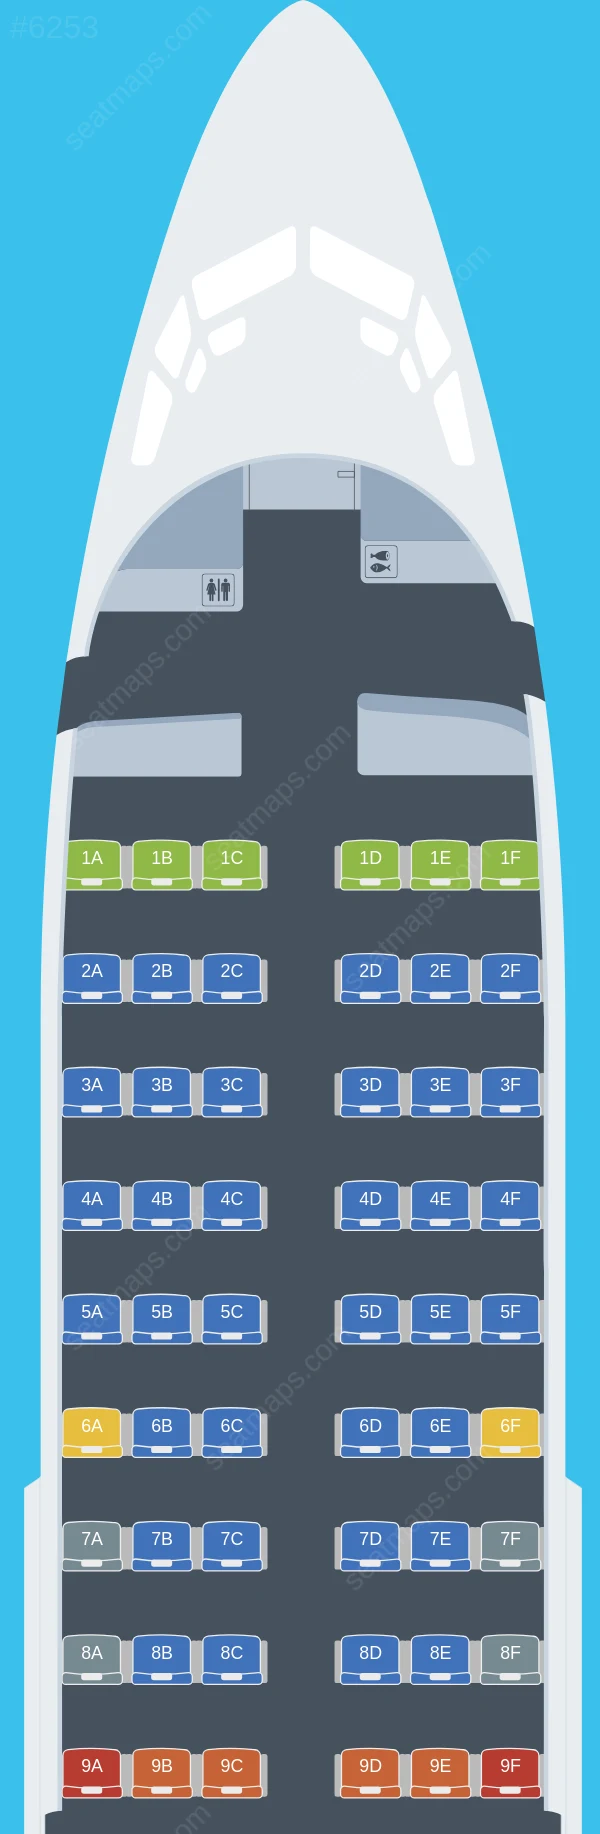 Tunisair Boeing 737-600 seatmap preview